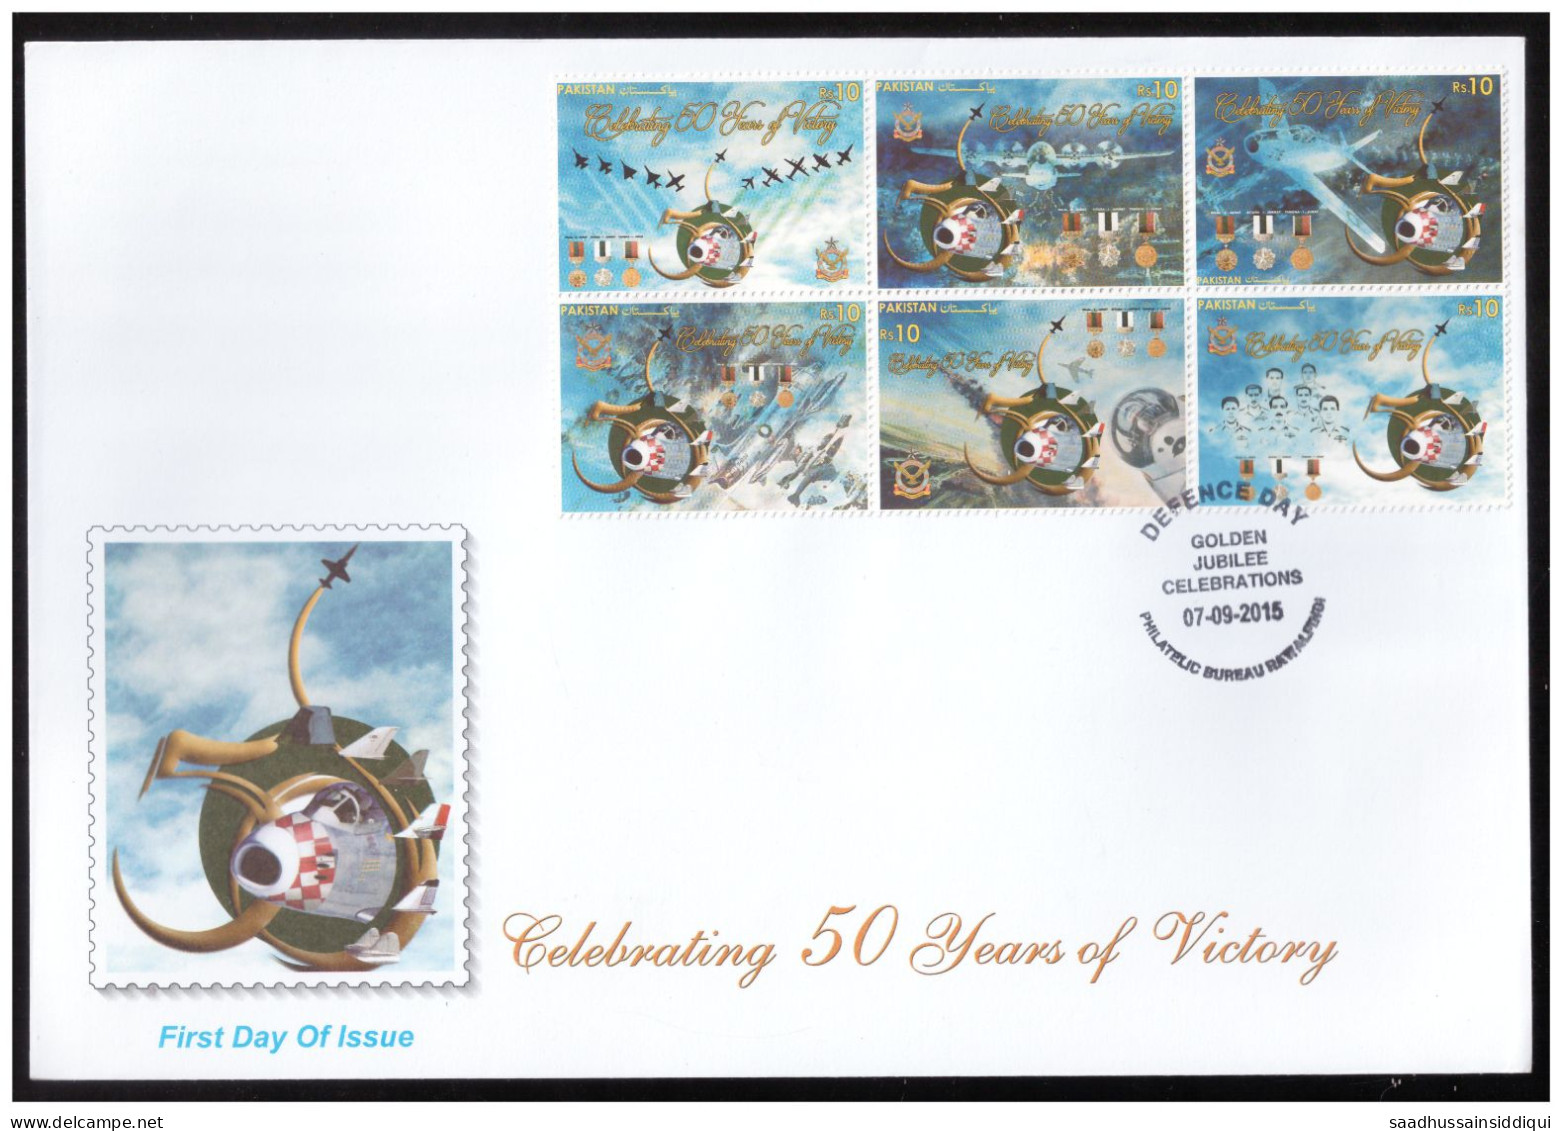 PAKISTAN FDC 2015 CELEBRATING 50 YEARS OF VICTORY IN 1965 WAR BETWEEN  INDIA AND PAKISTAN AIRFORCE , FIGHTER AIRPLANE - Pakistán